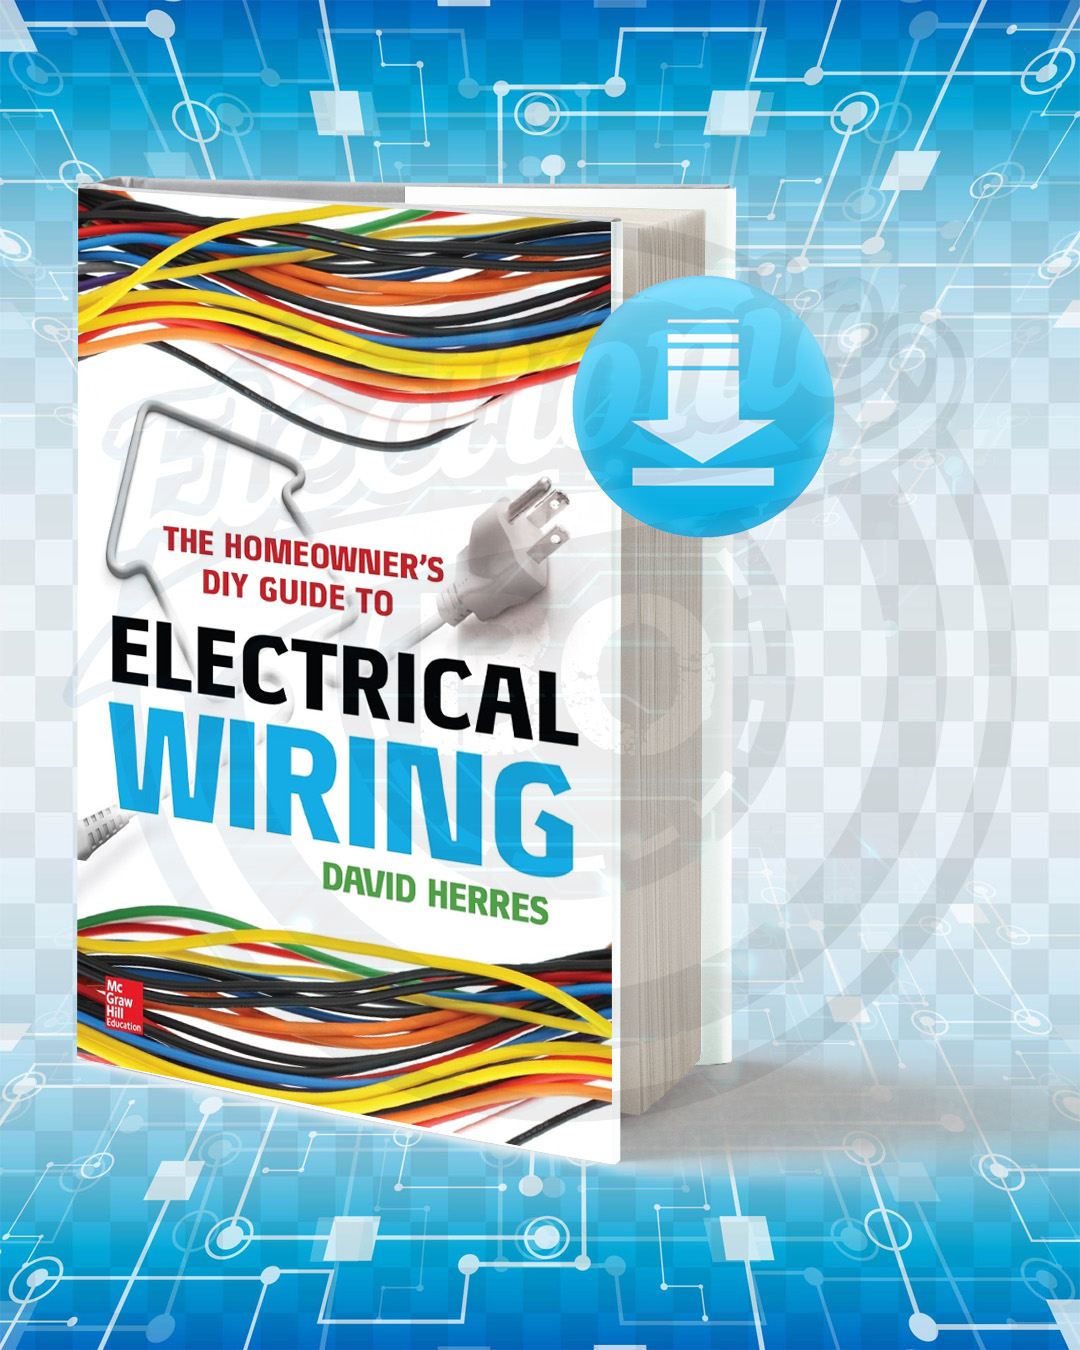 Download The Homeowners DIY Guide to Electrical Wiring pdf.